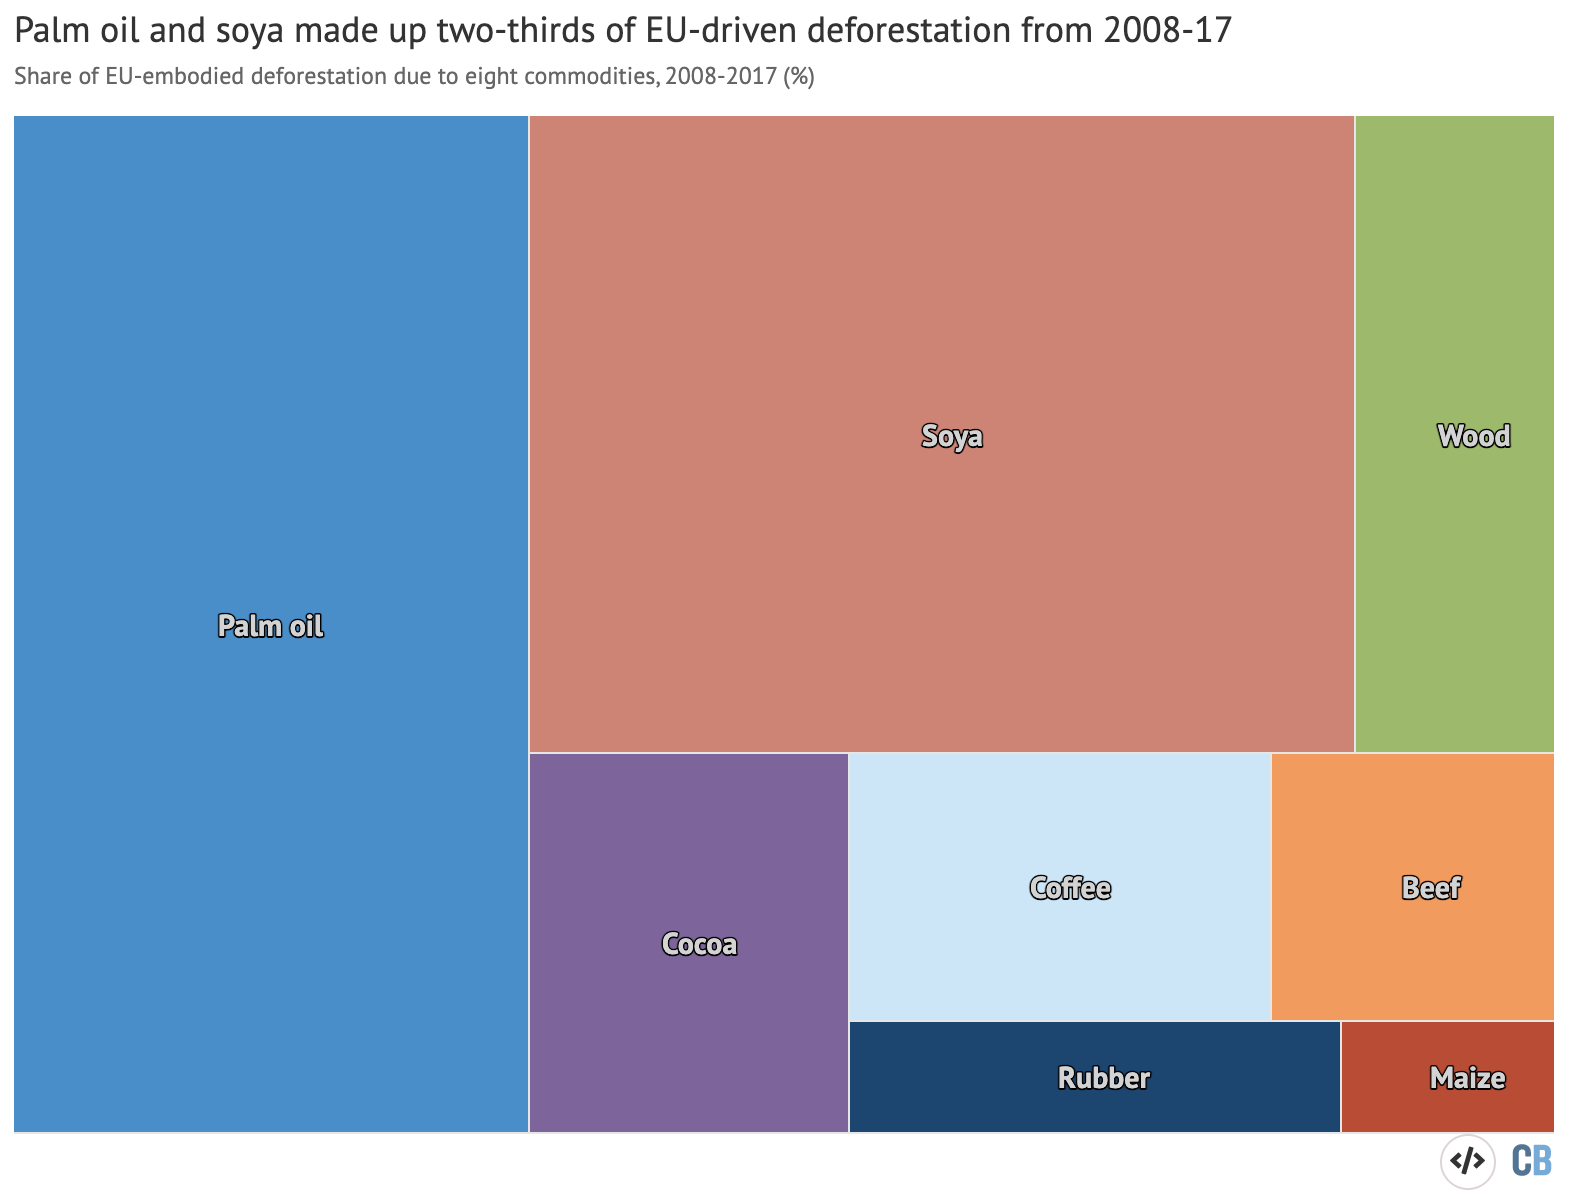 Contributions of eight key commodities to EU-driven deforestation between 2008 and 2017. Percentage shares are shown for palm oil (blue), soy (red), wood (green), cocoa (purple), coffee (light blue), beef (orange), rubber (dark blue) and maize (dark red). Source: European Commission (2021) 